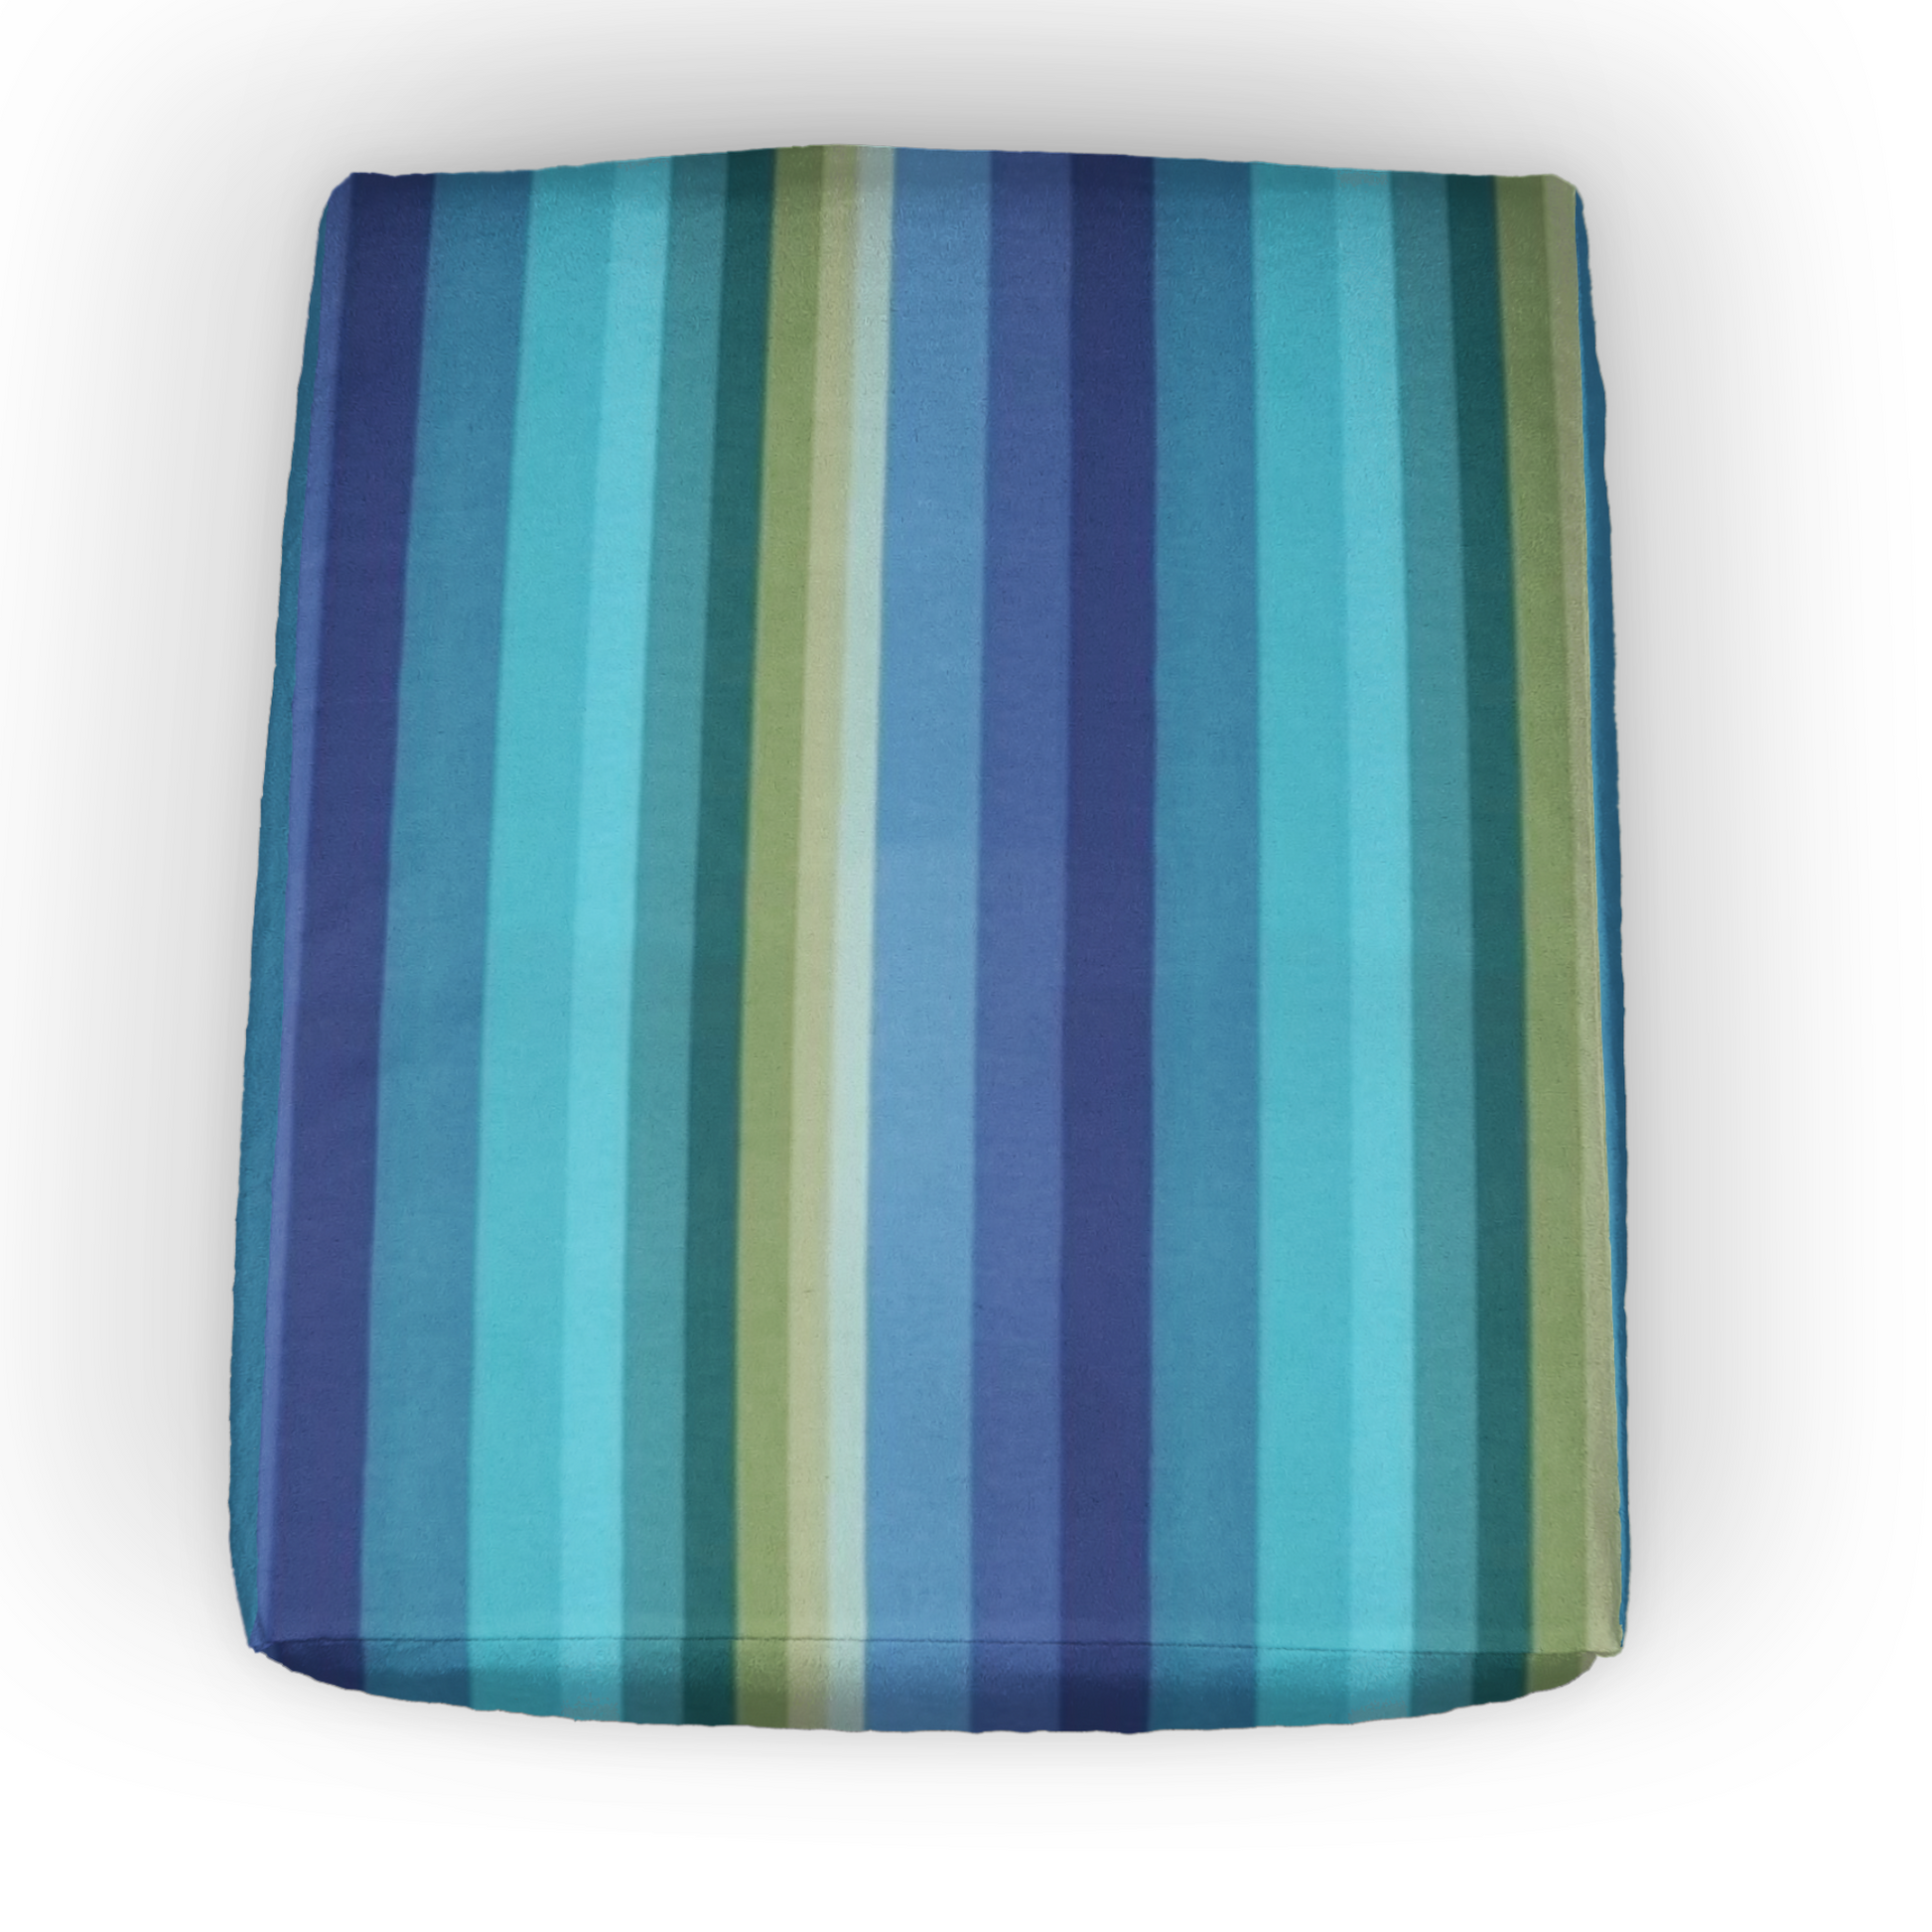 Fabric Sample Only 3x5 inch - Summer Islip Stripes